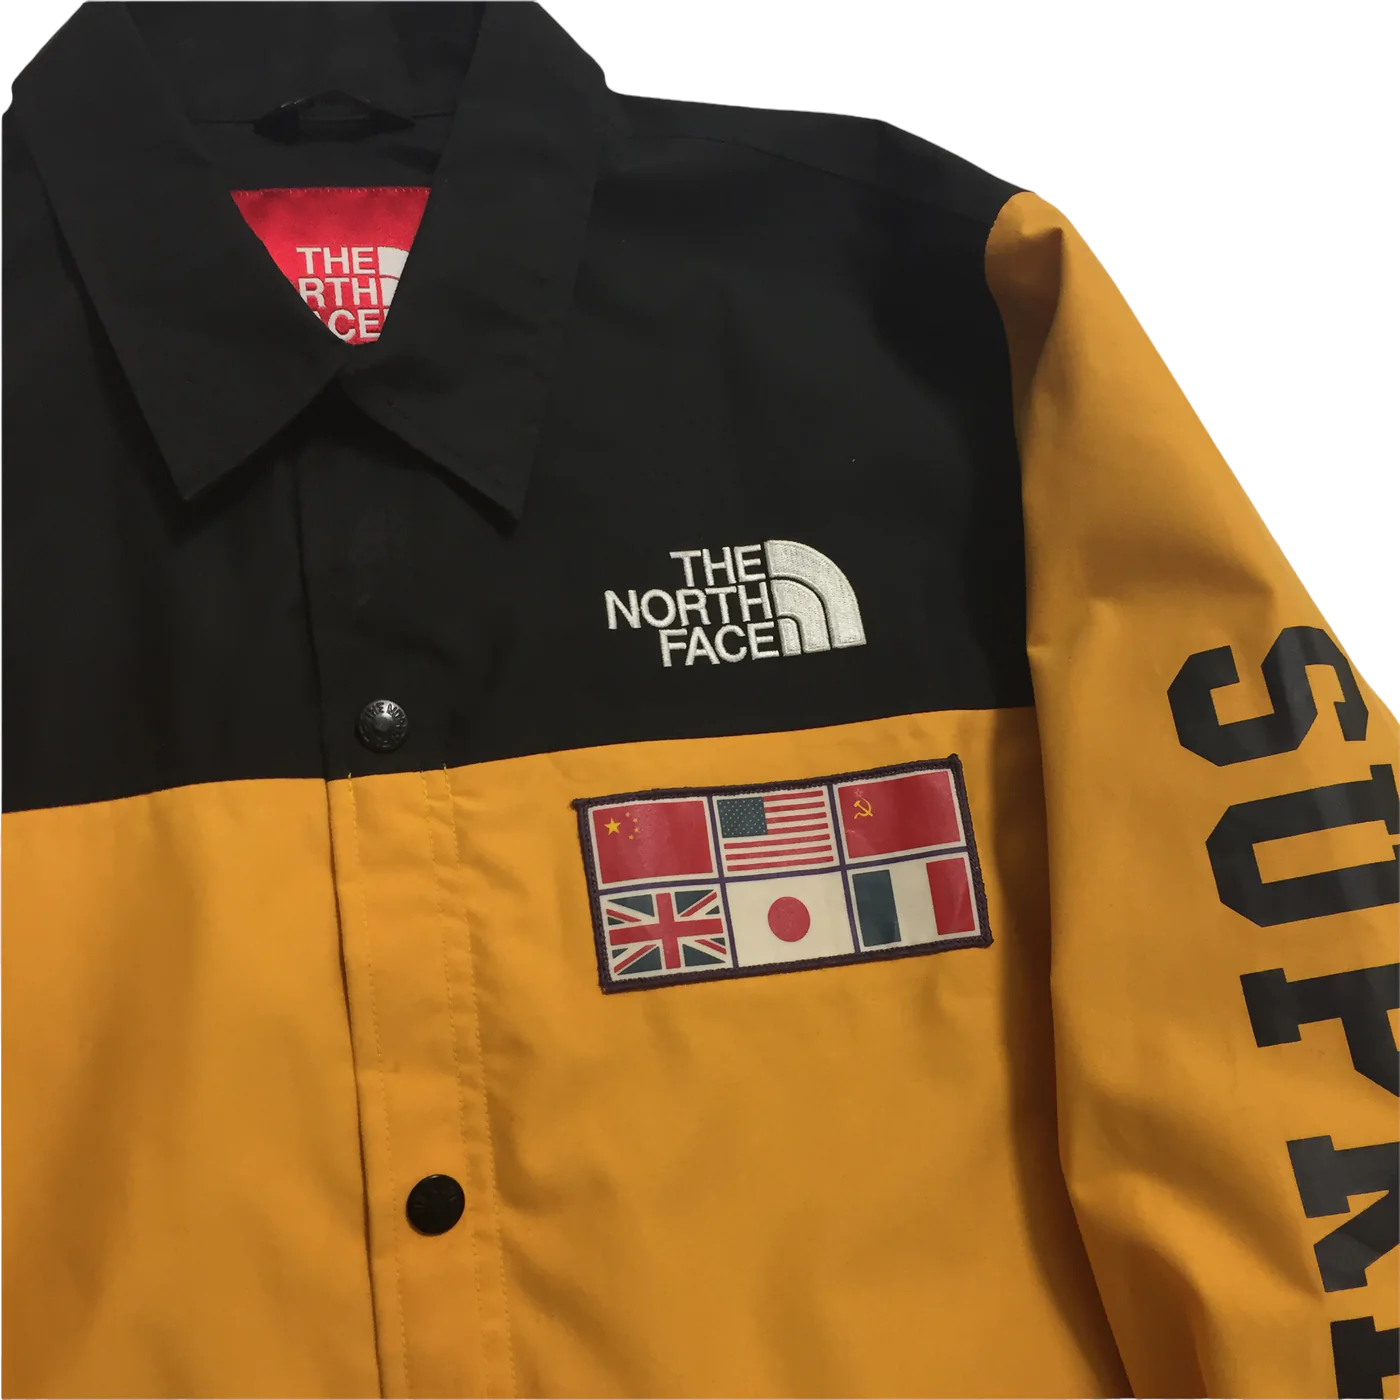 2014 Supreme x The North Face Yellow Expedition Coach